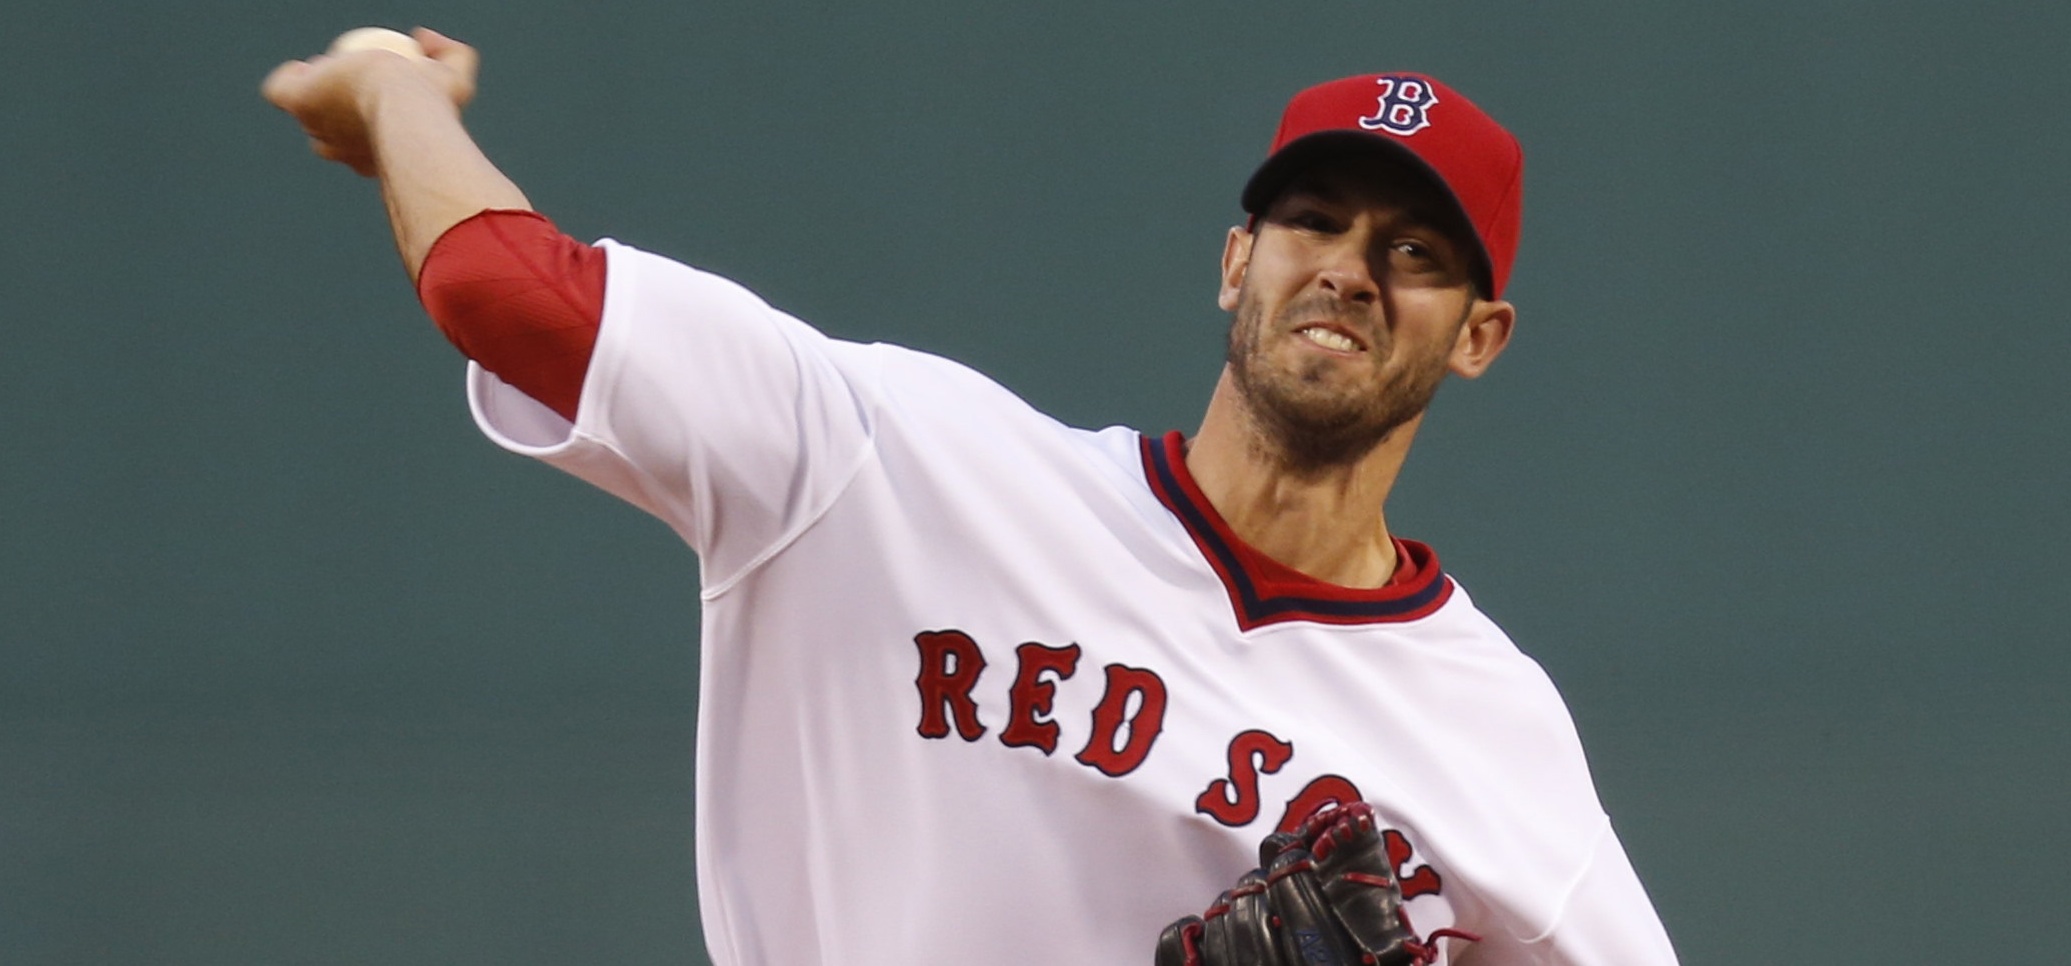 May 5, 2015; Boston, MA, USA; Boston Red Sox pitcher Rick Porcello (22) delivers a pitch during the first inning against the Tampa Bay Rays at Fenway Park. Mandatory Credit: Greg M. Cooper-USA TODAY Sports